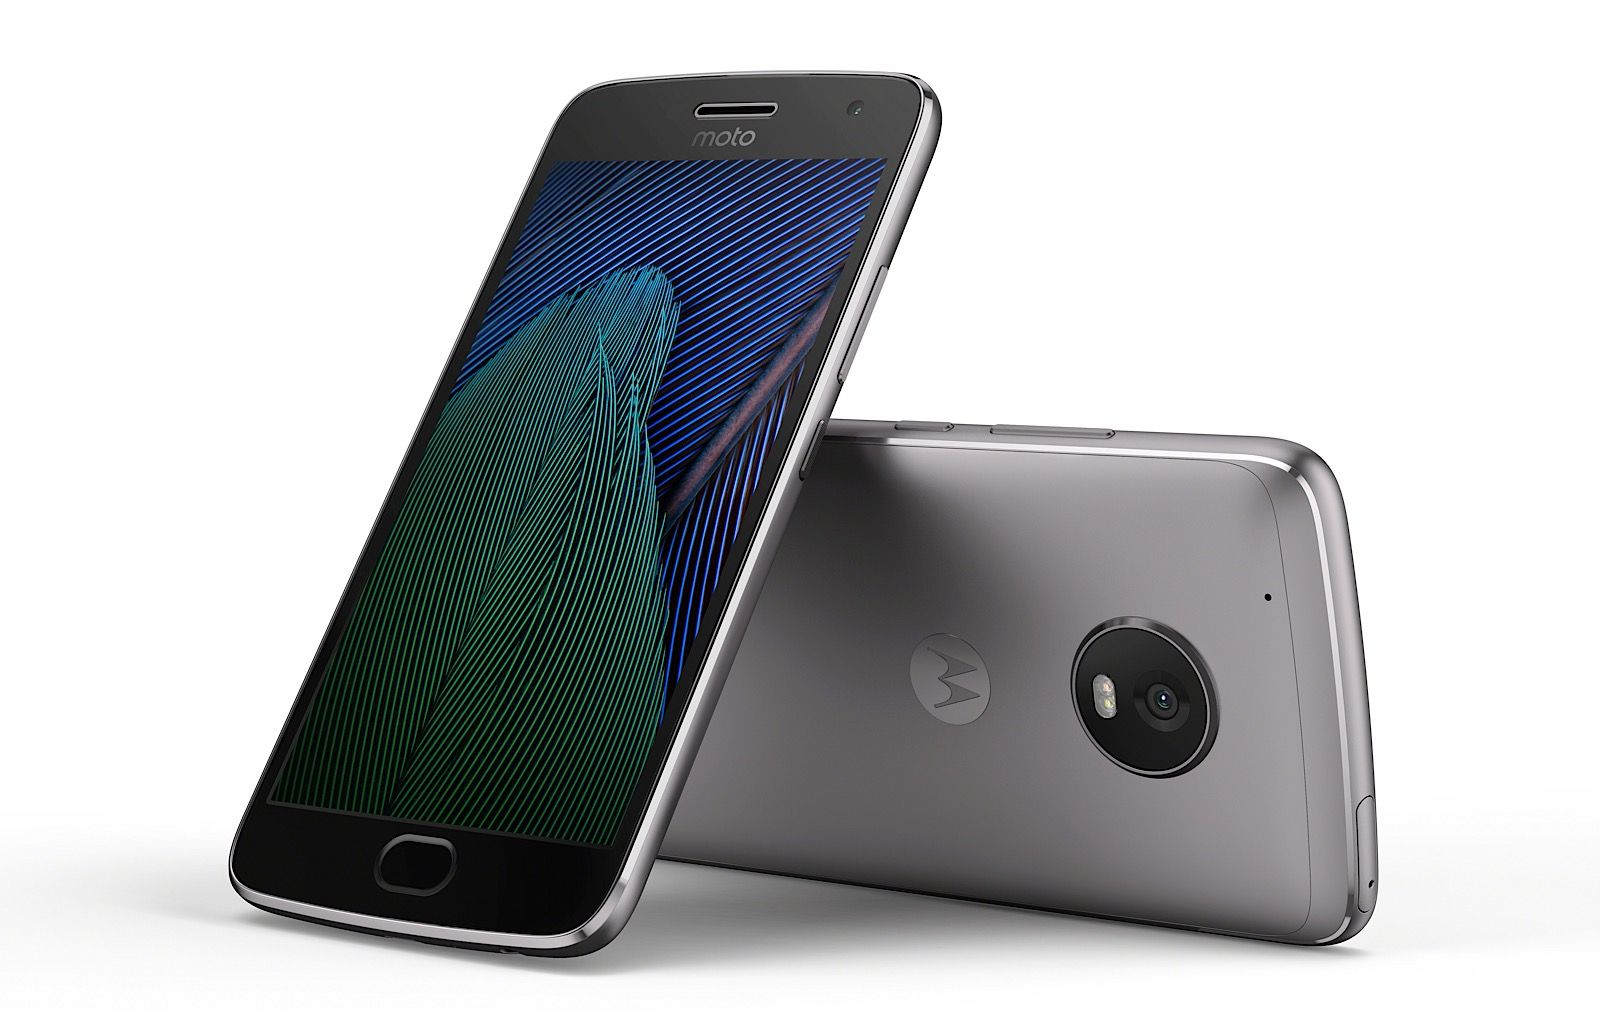 motorola moto g5 and g5 plus arrive to retain the budget smartphone crown image 2